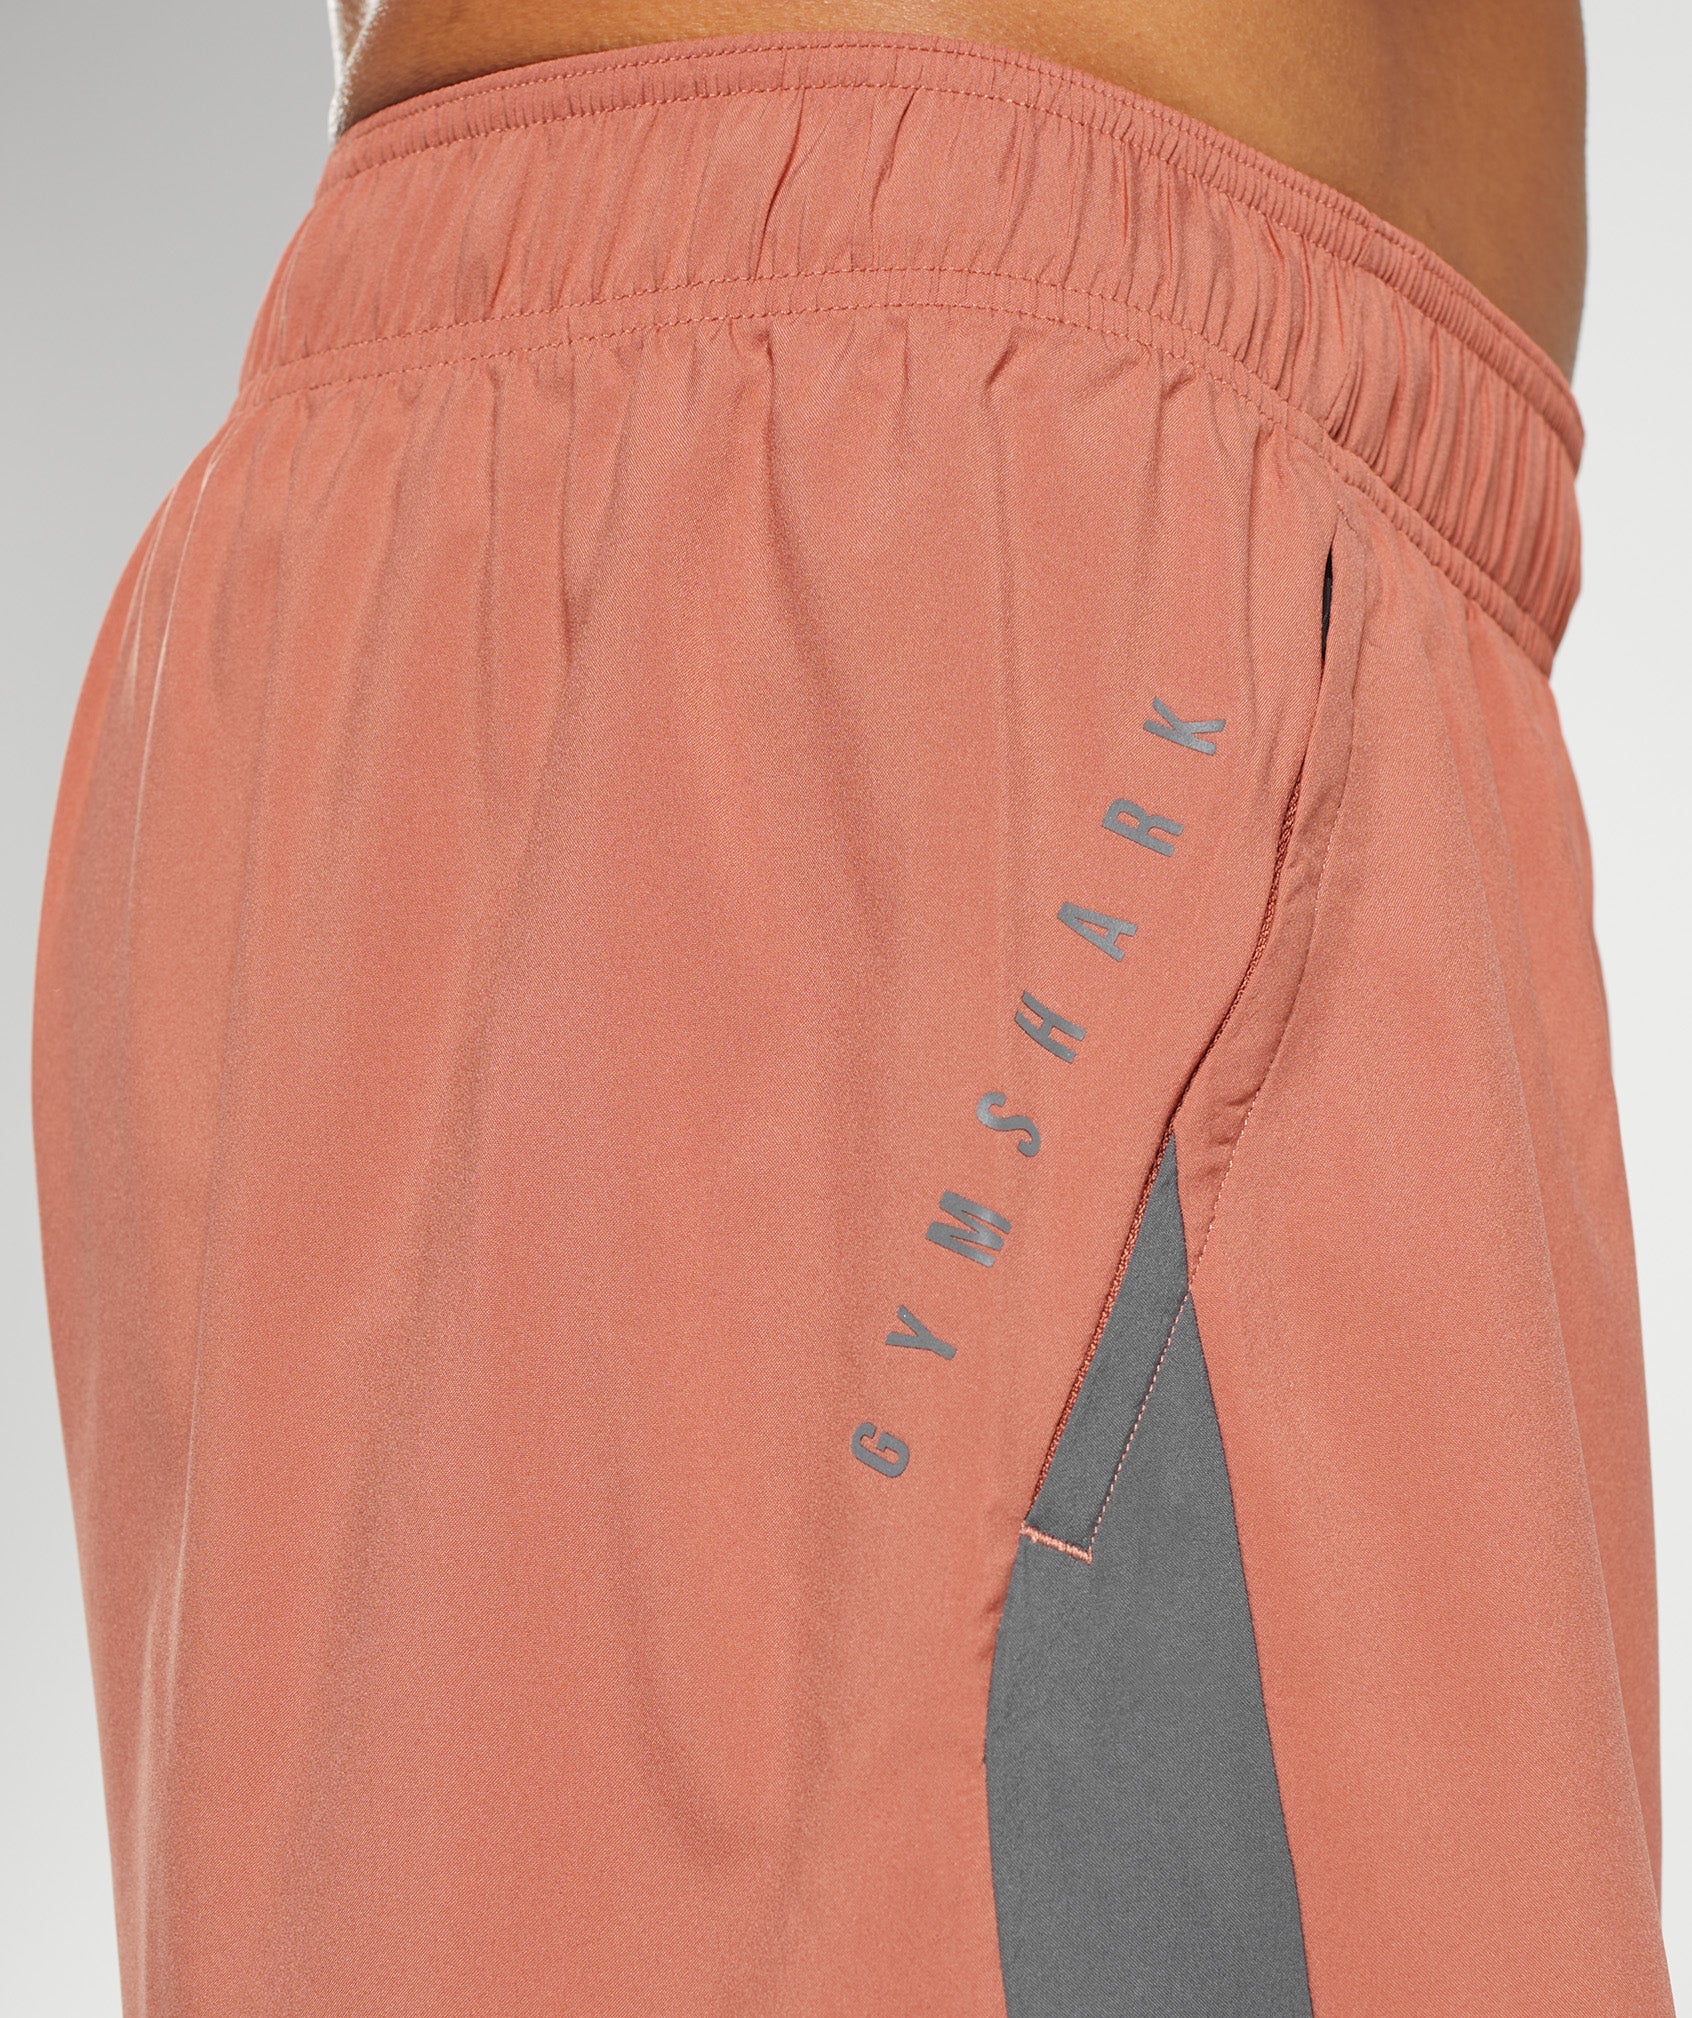 Sport Shorts in Persimmon Red/Silhouette Grey - view 5